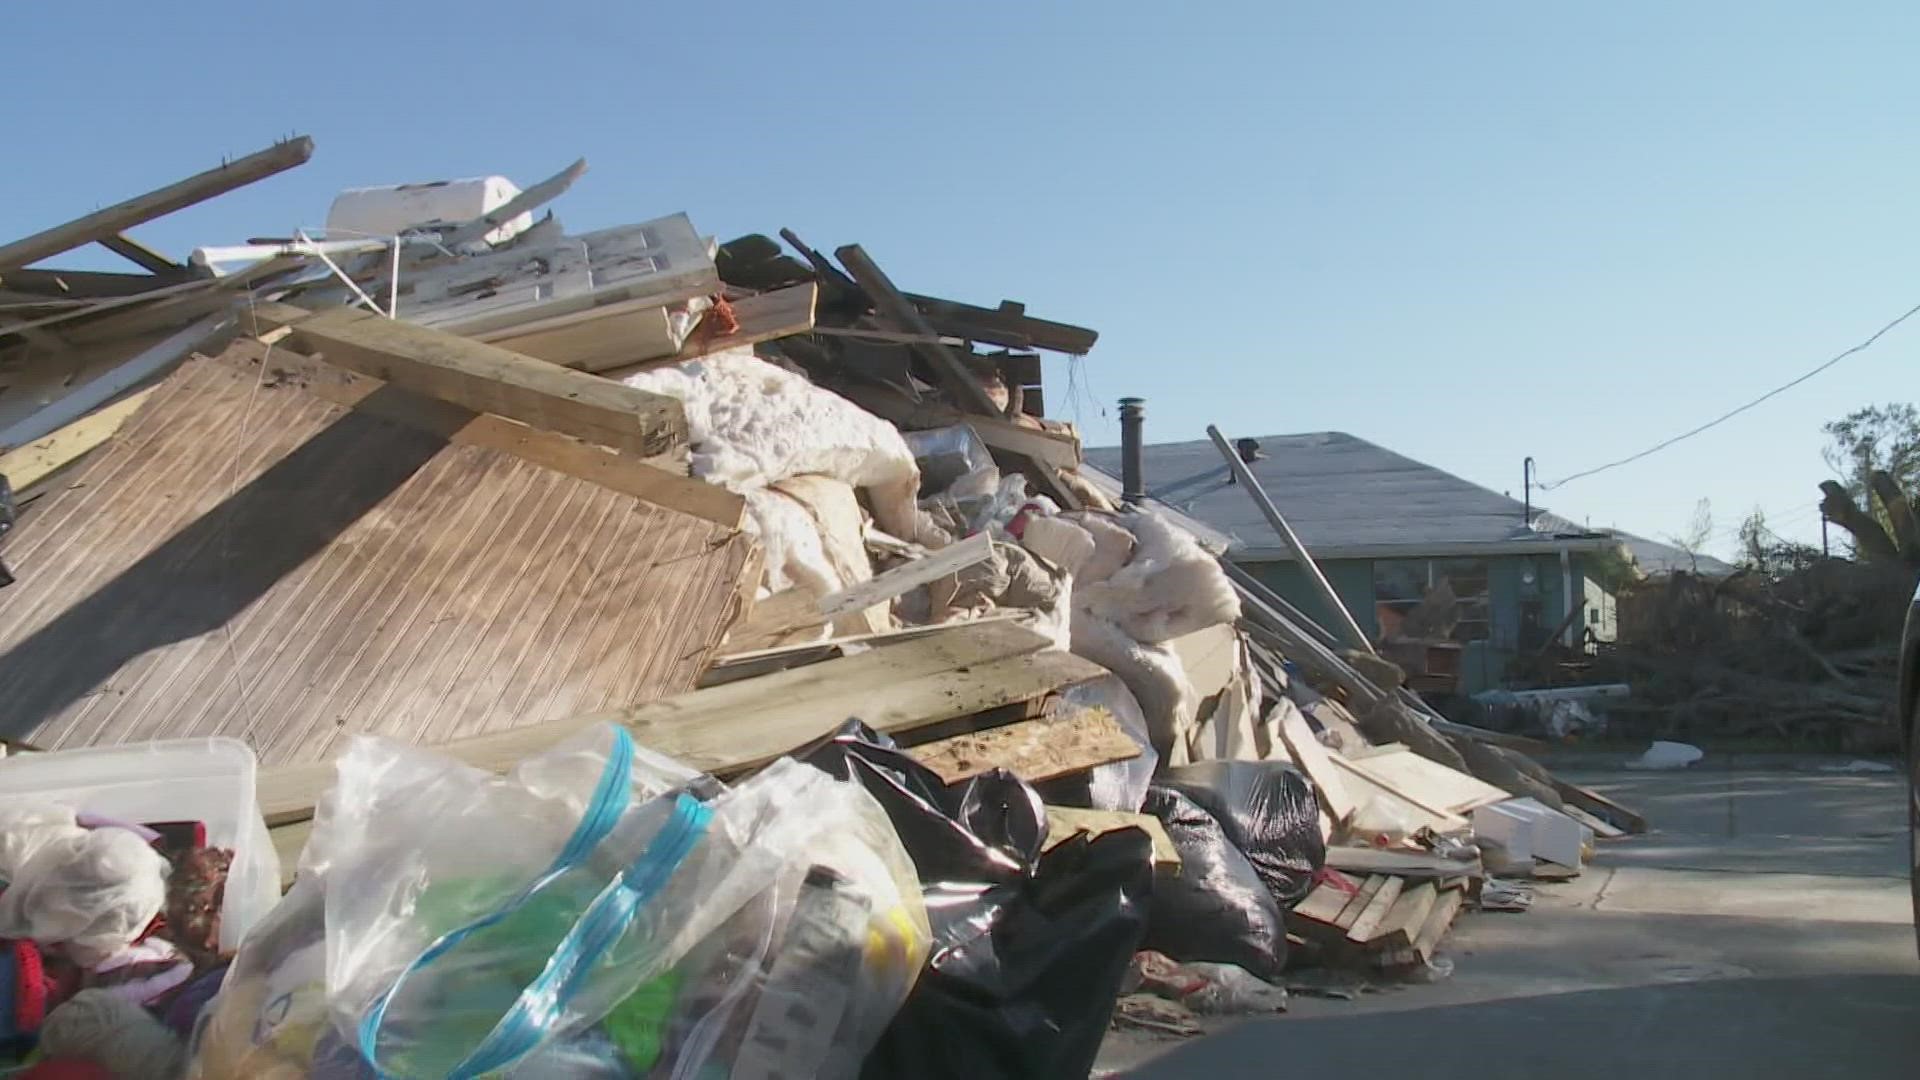 Residents are very angry as the mountains of debris from Hurricane Ida continue to pile up higher and higher.